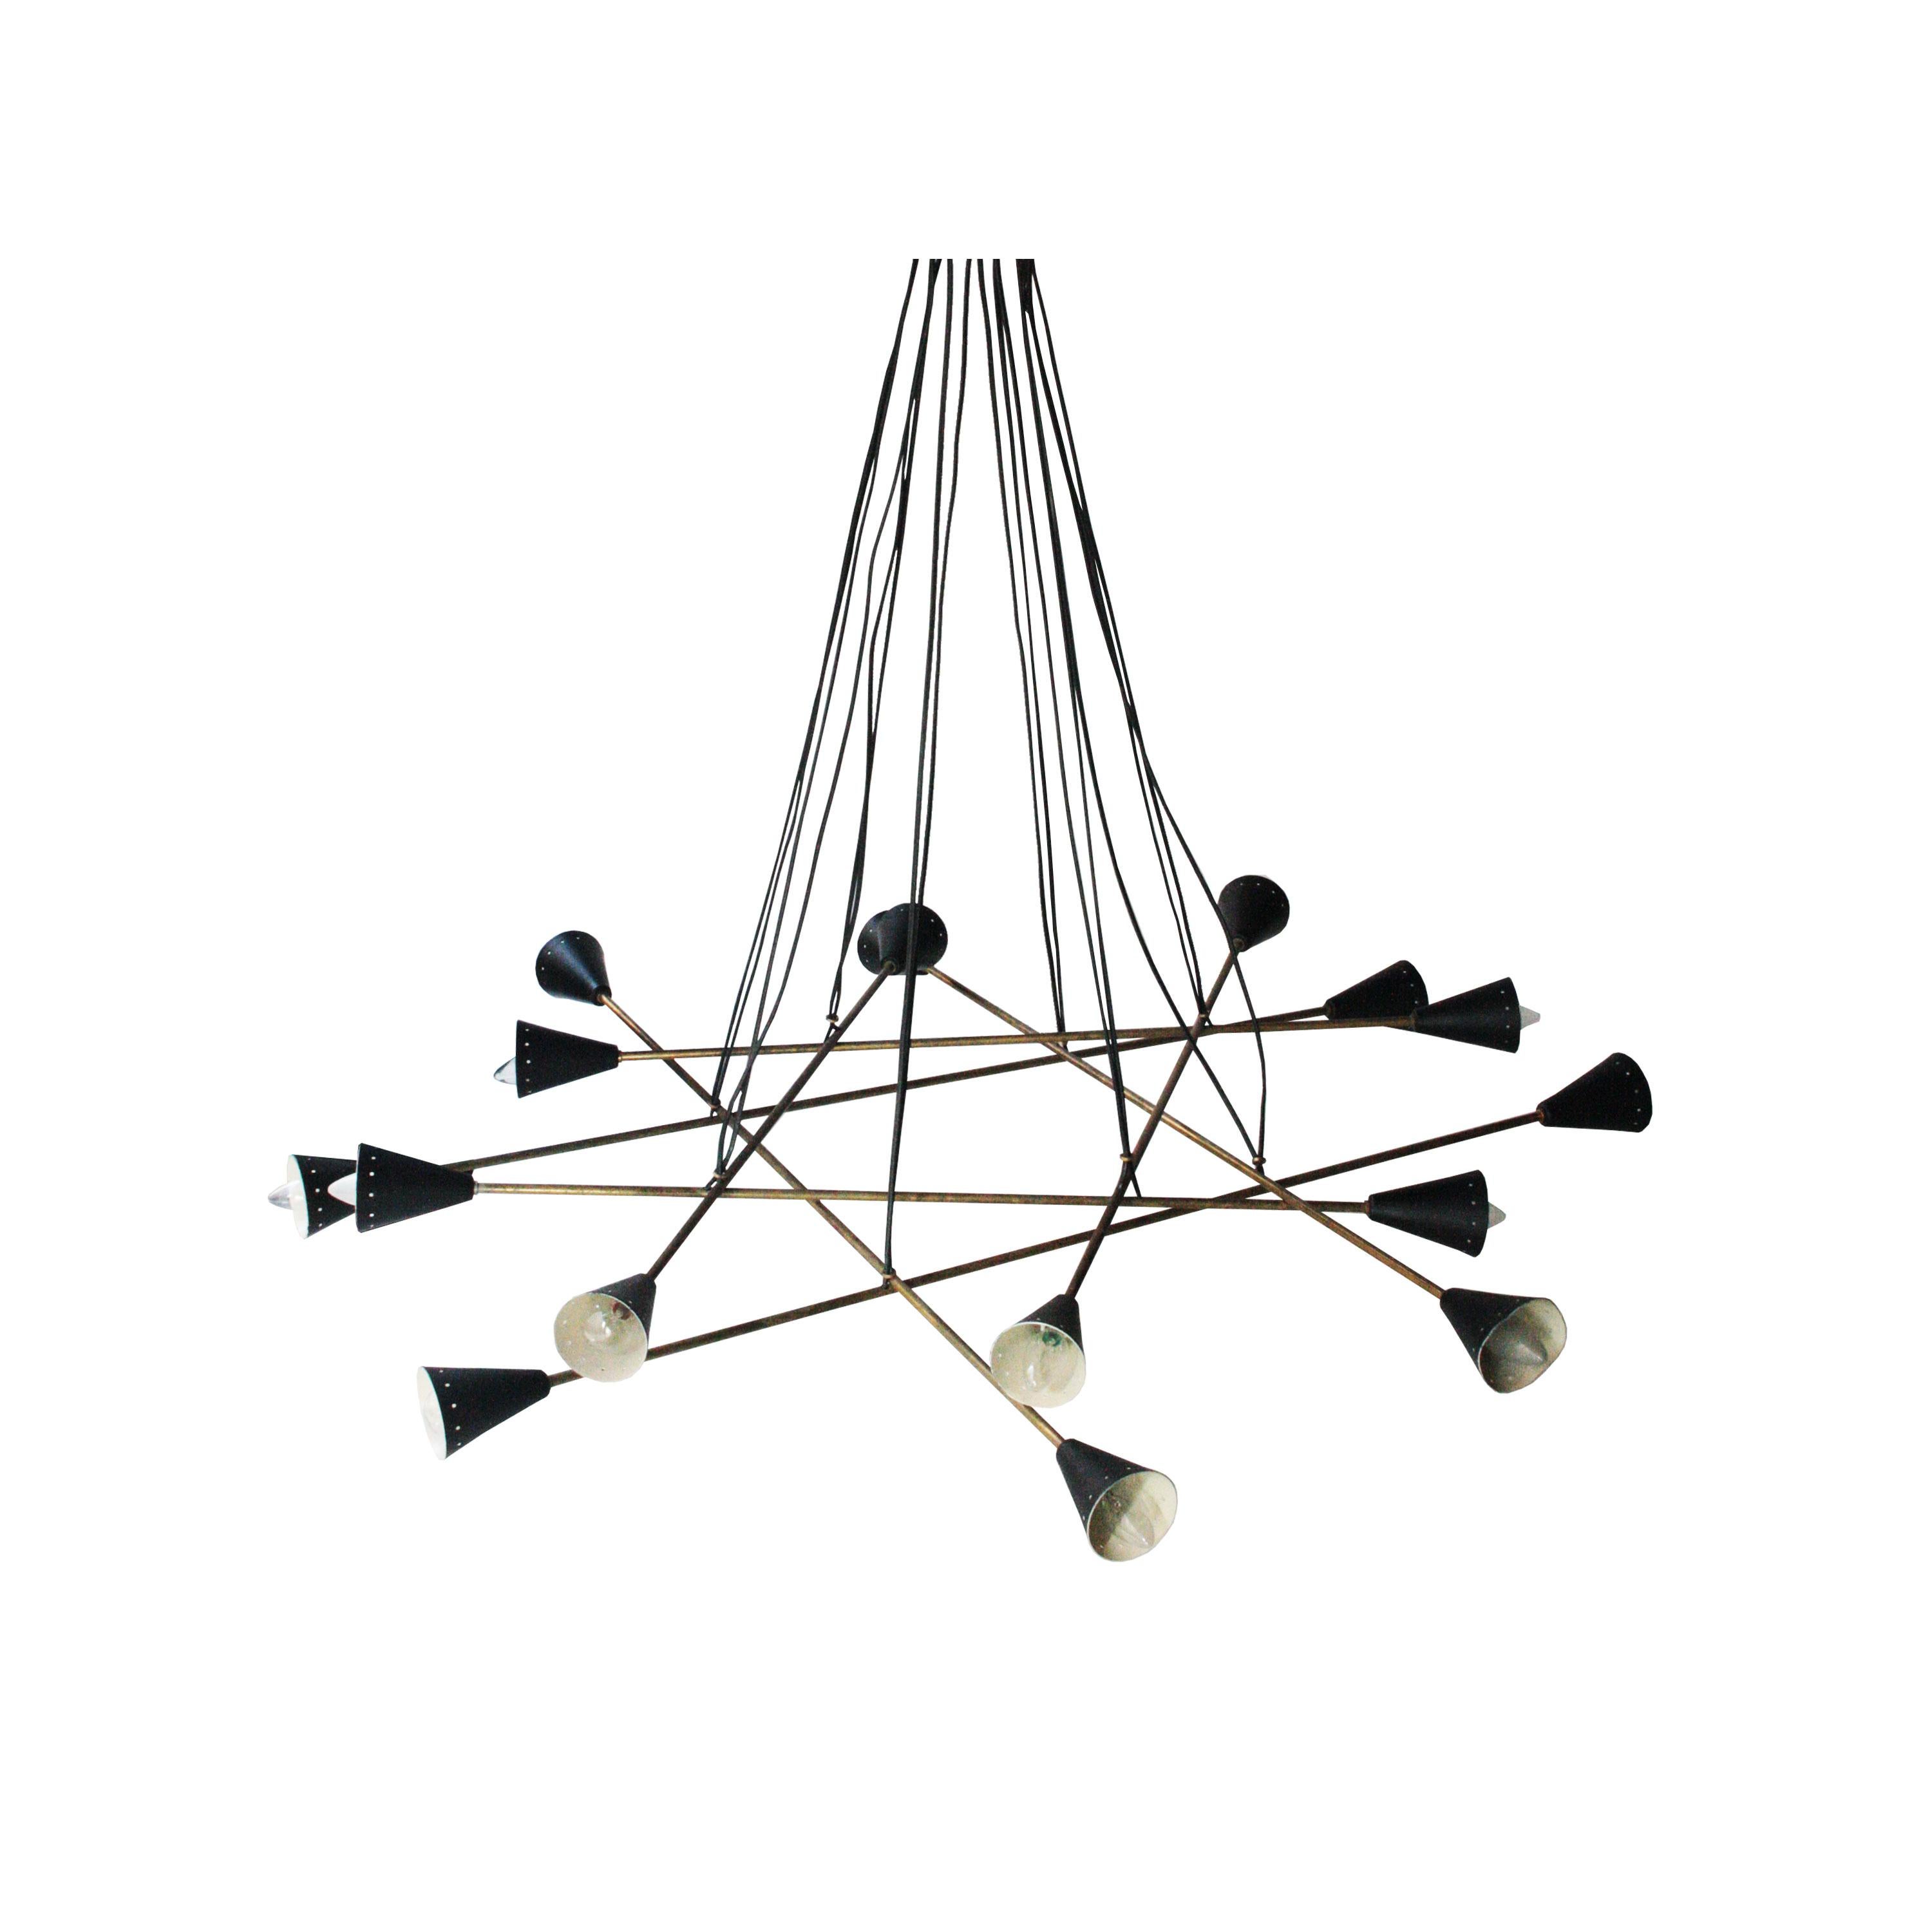 Sputnik style after Stilnovo ceiling lamp. Brass structure with black laquered shades. Sixteen light points.
